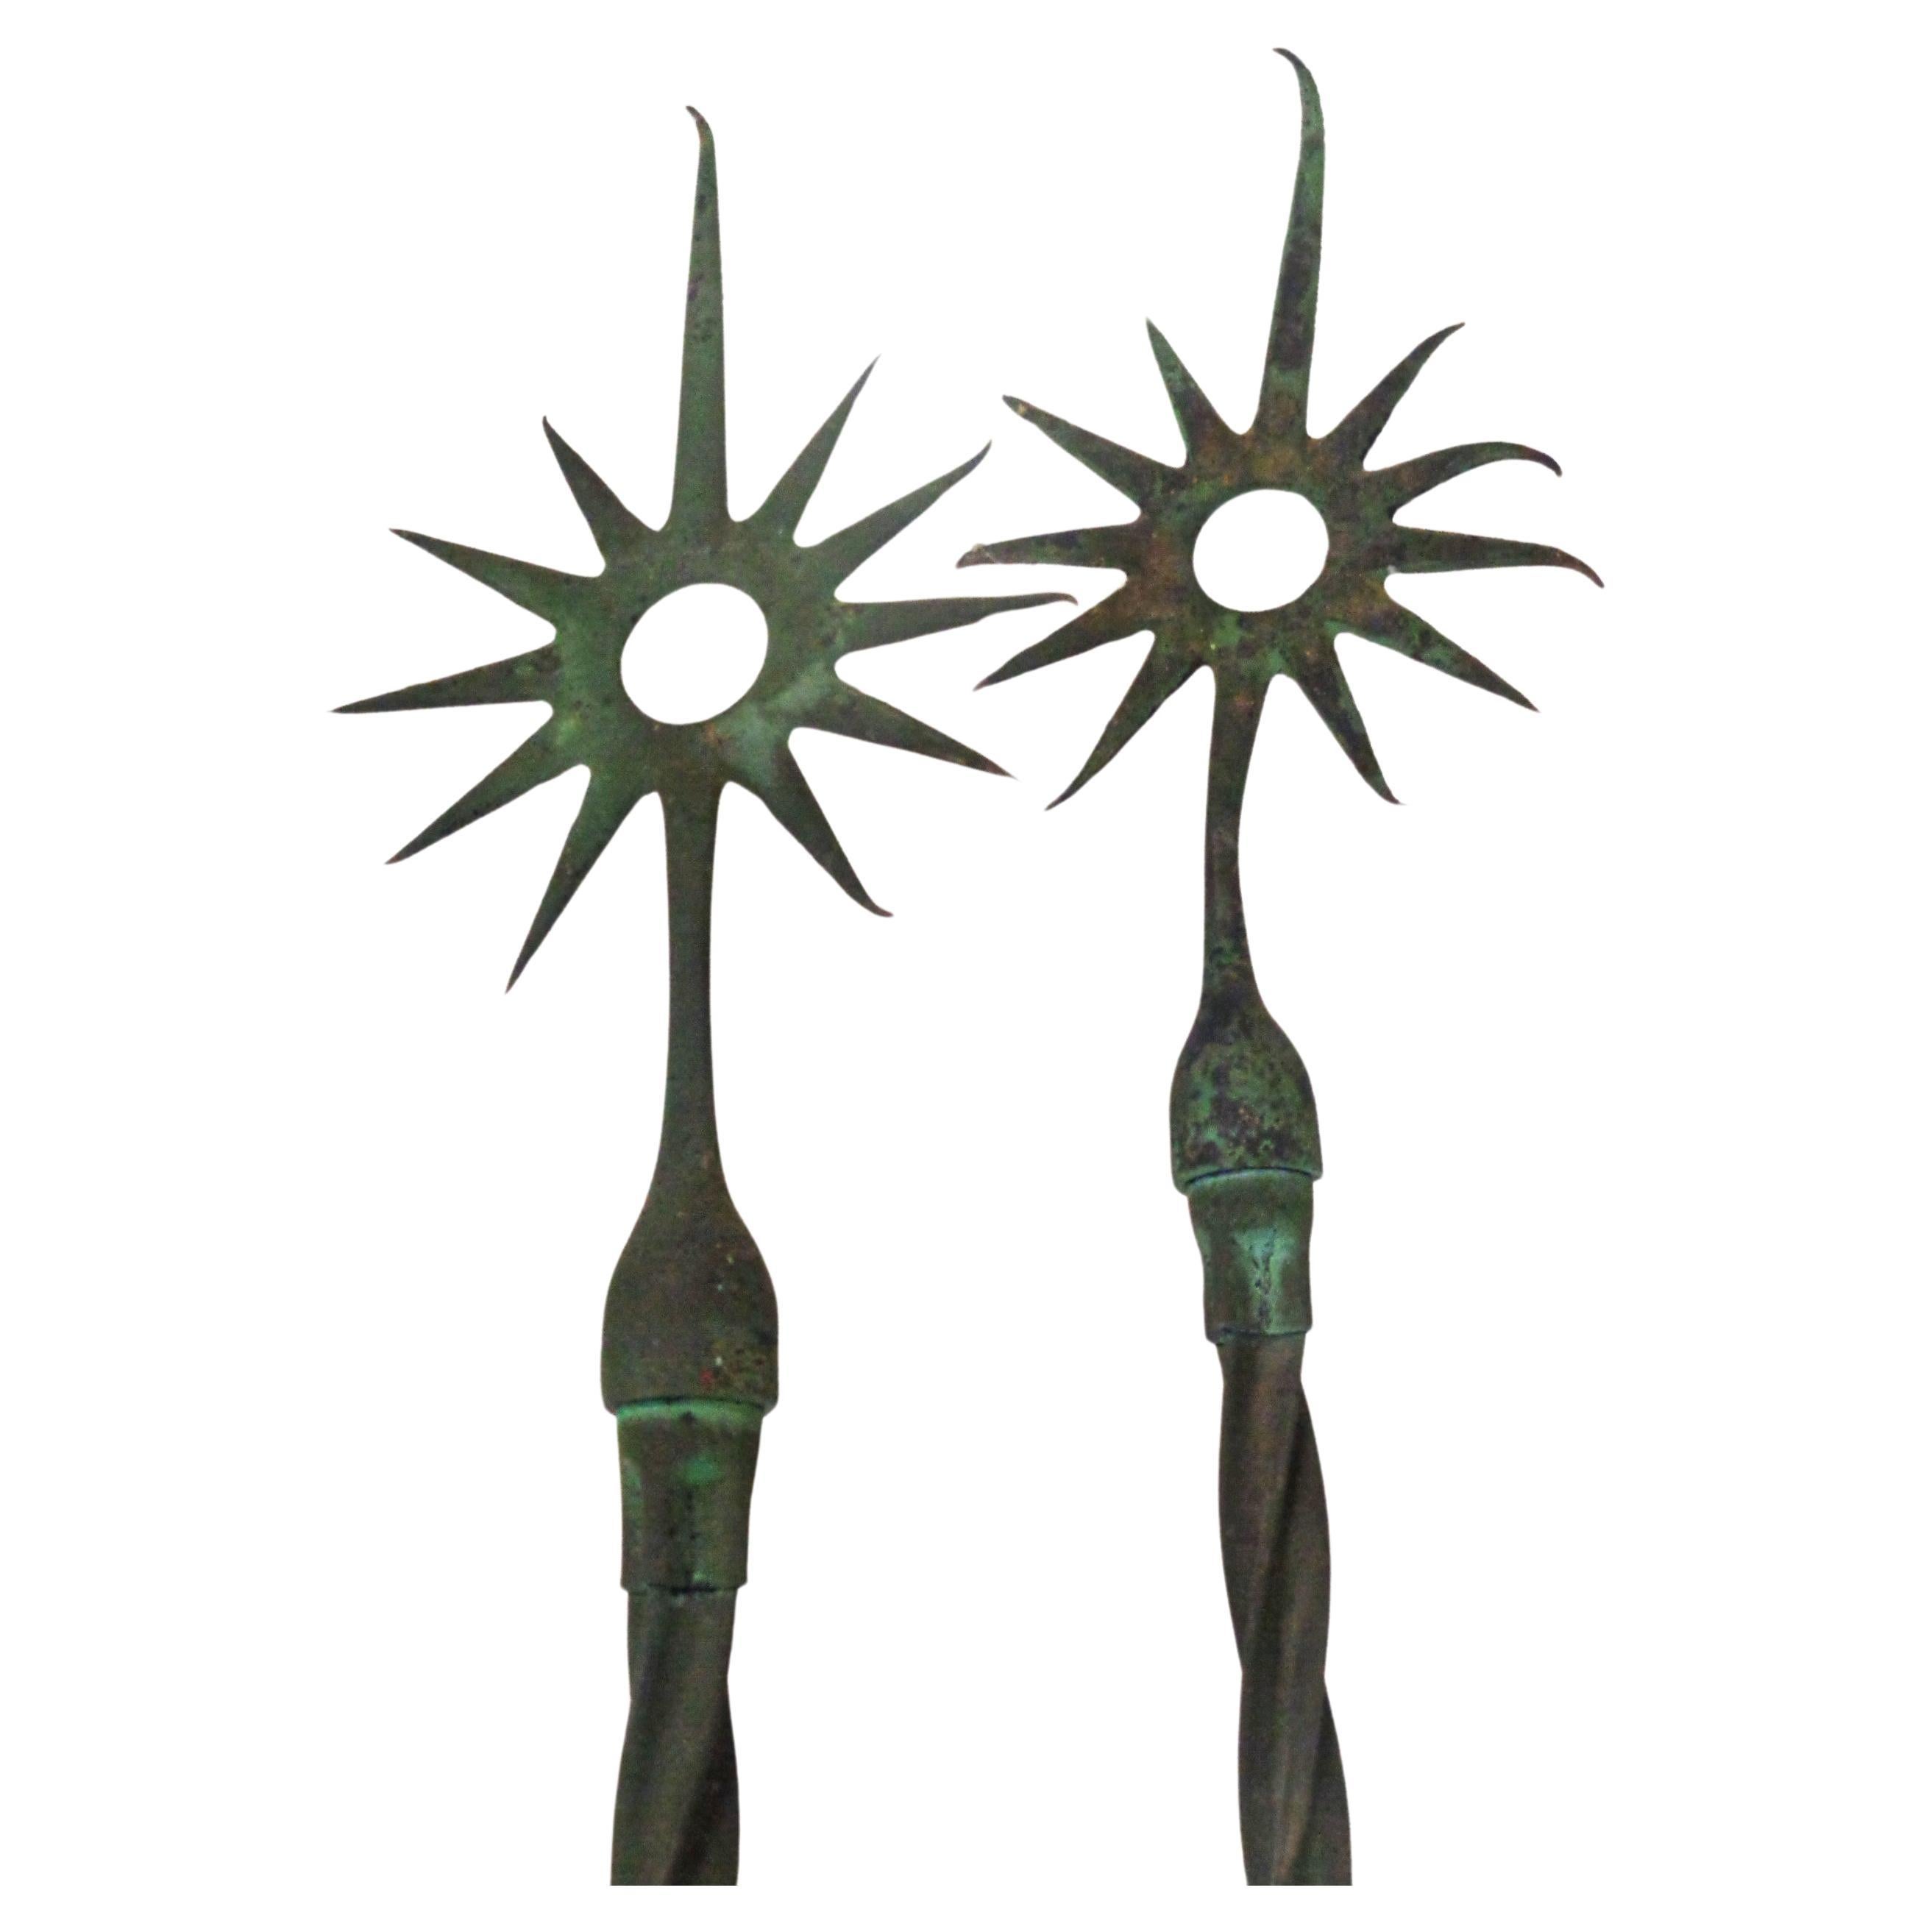 Hand-Crafted Pair Antique American Sunburst Top Lightning Rods, Circa 1870 For Sale